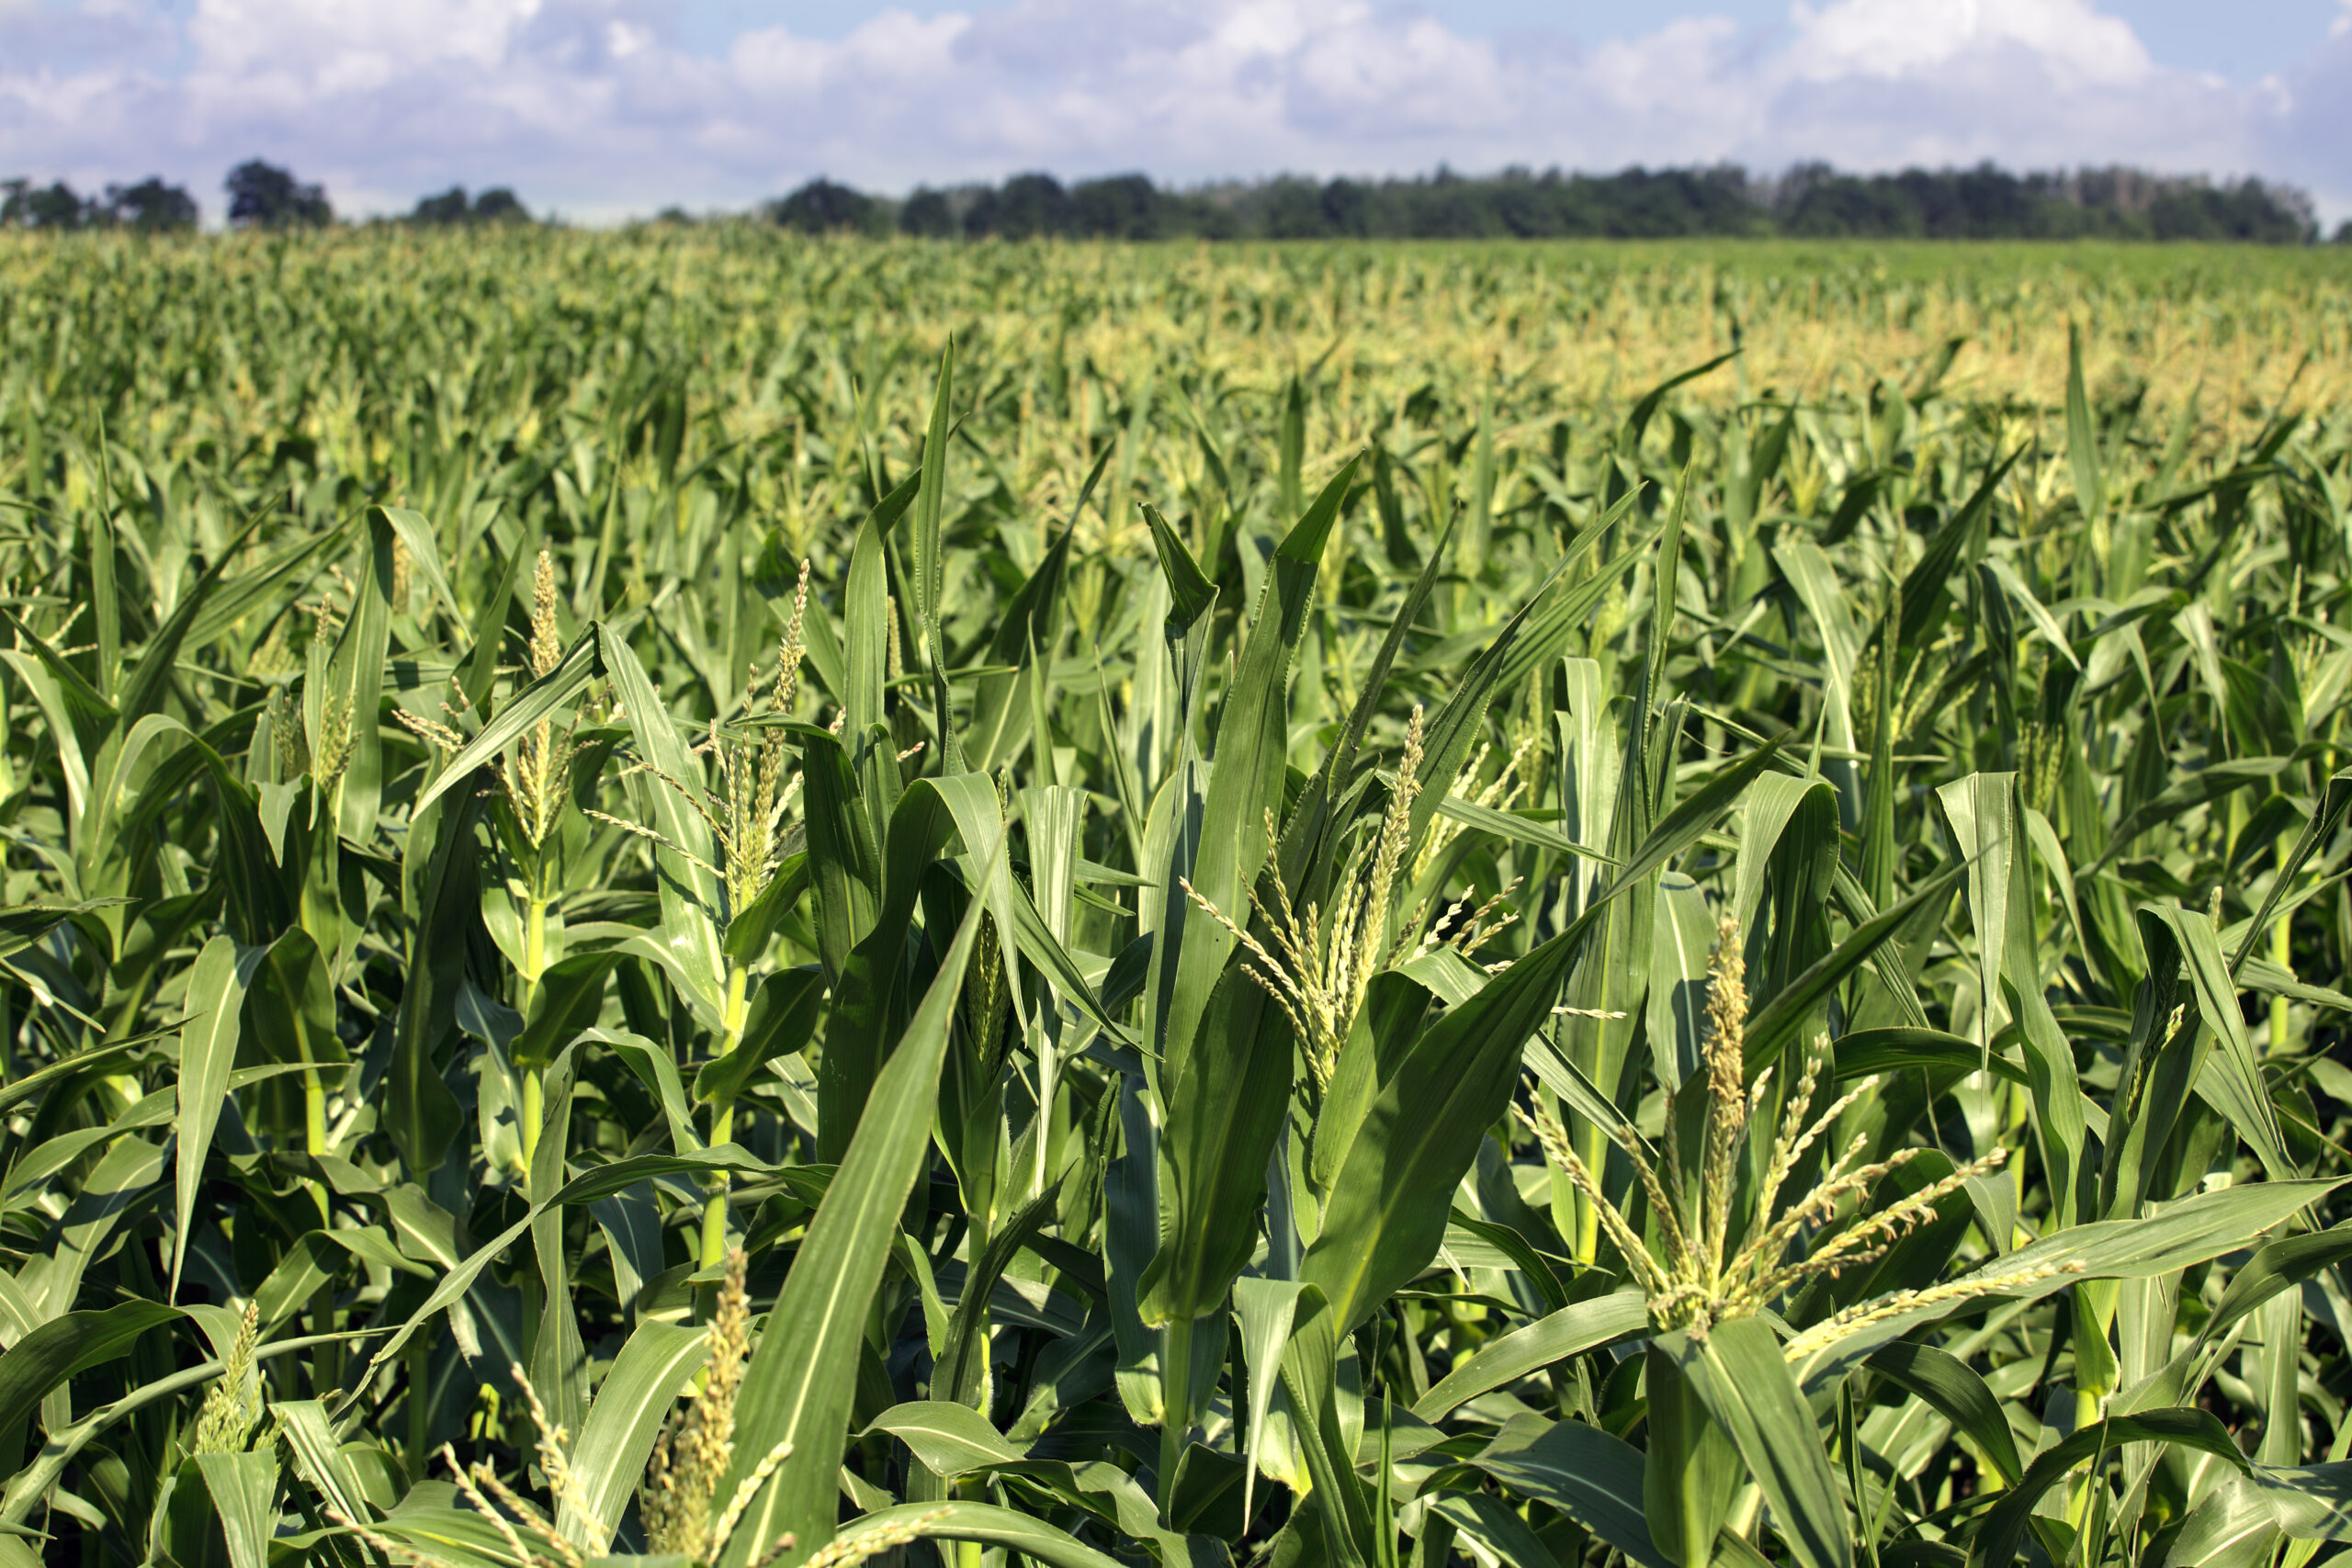 Air pollution from corn production might contribute to thousands of deaths each year